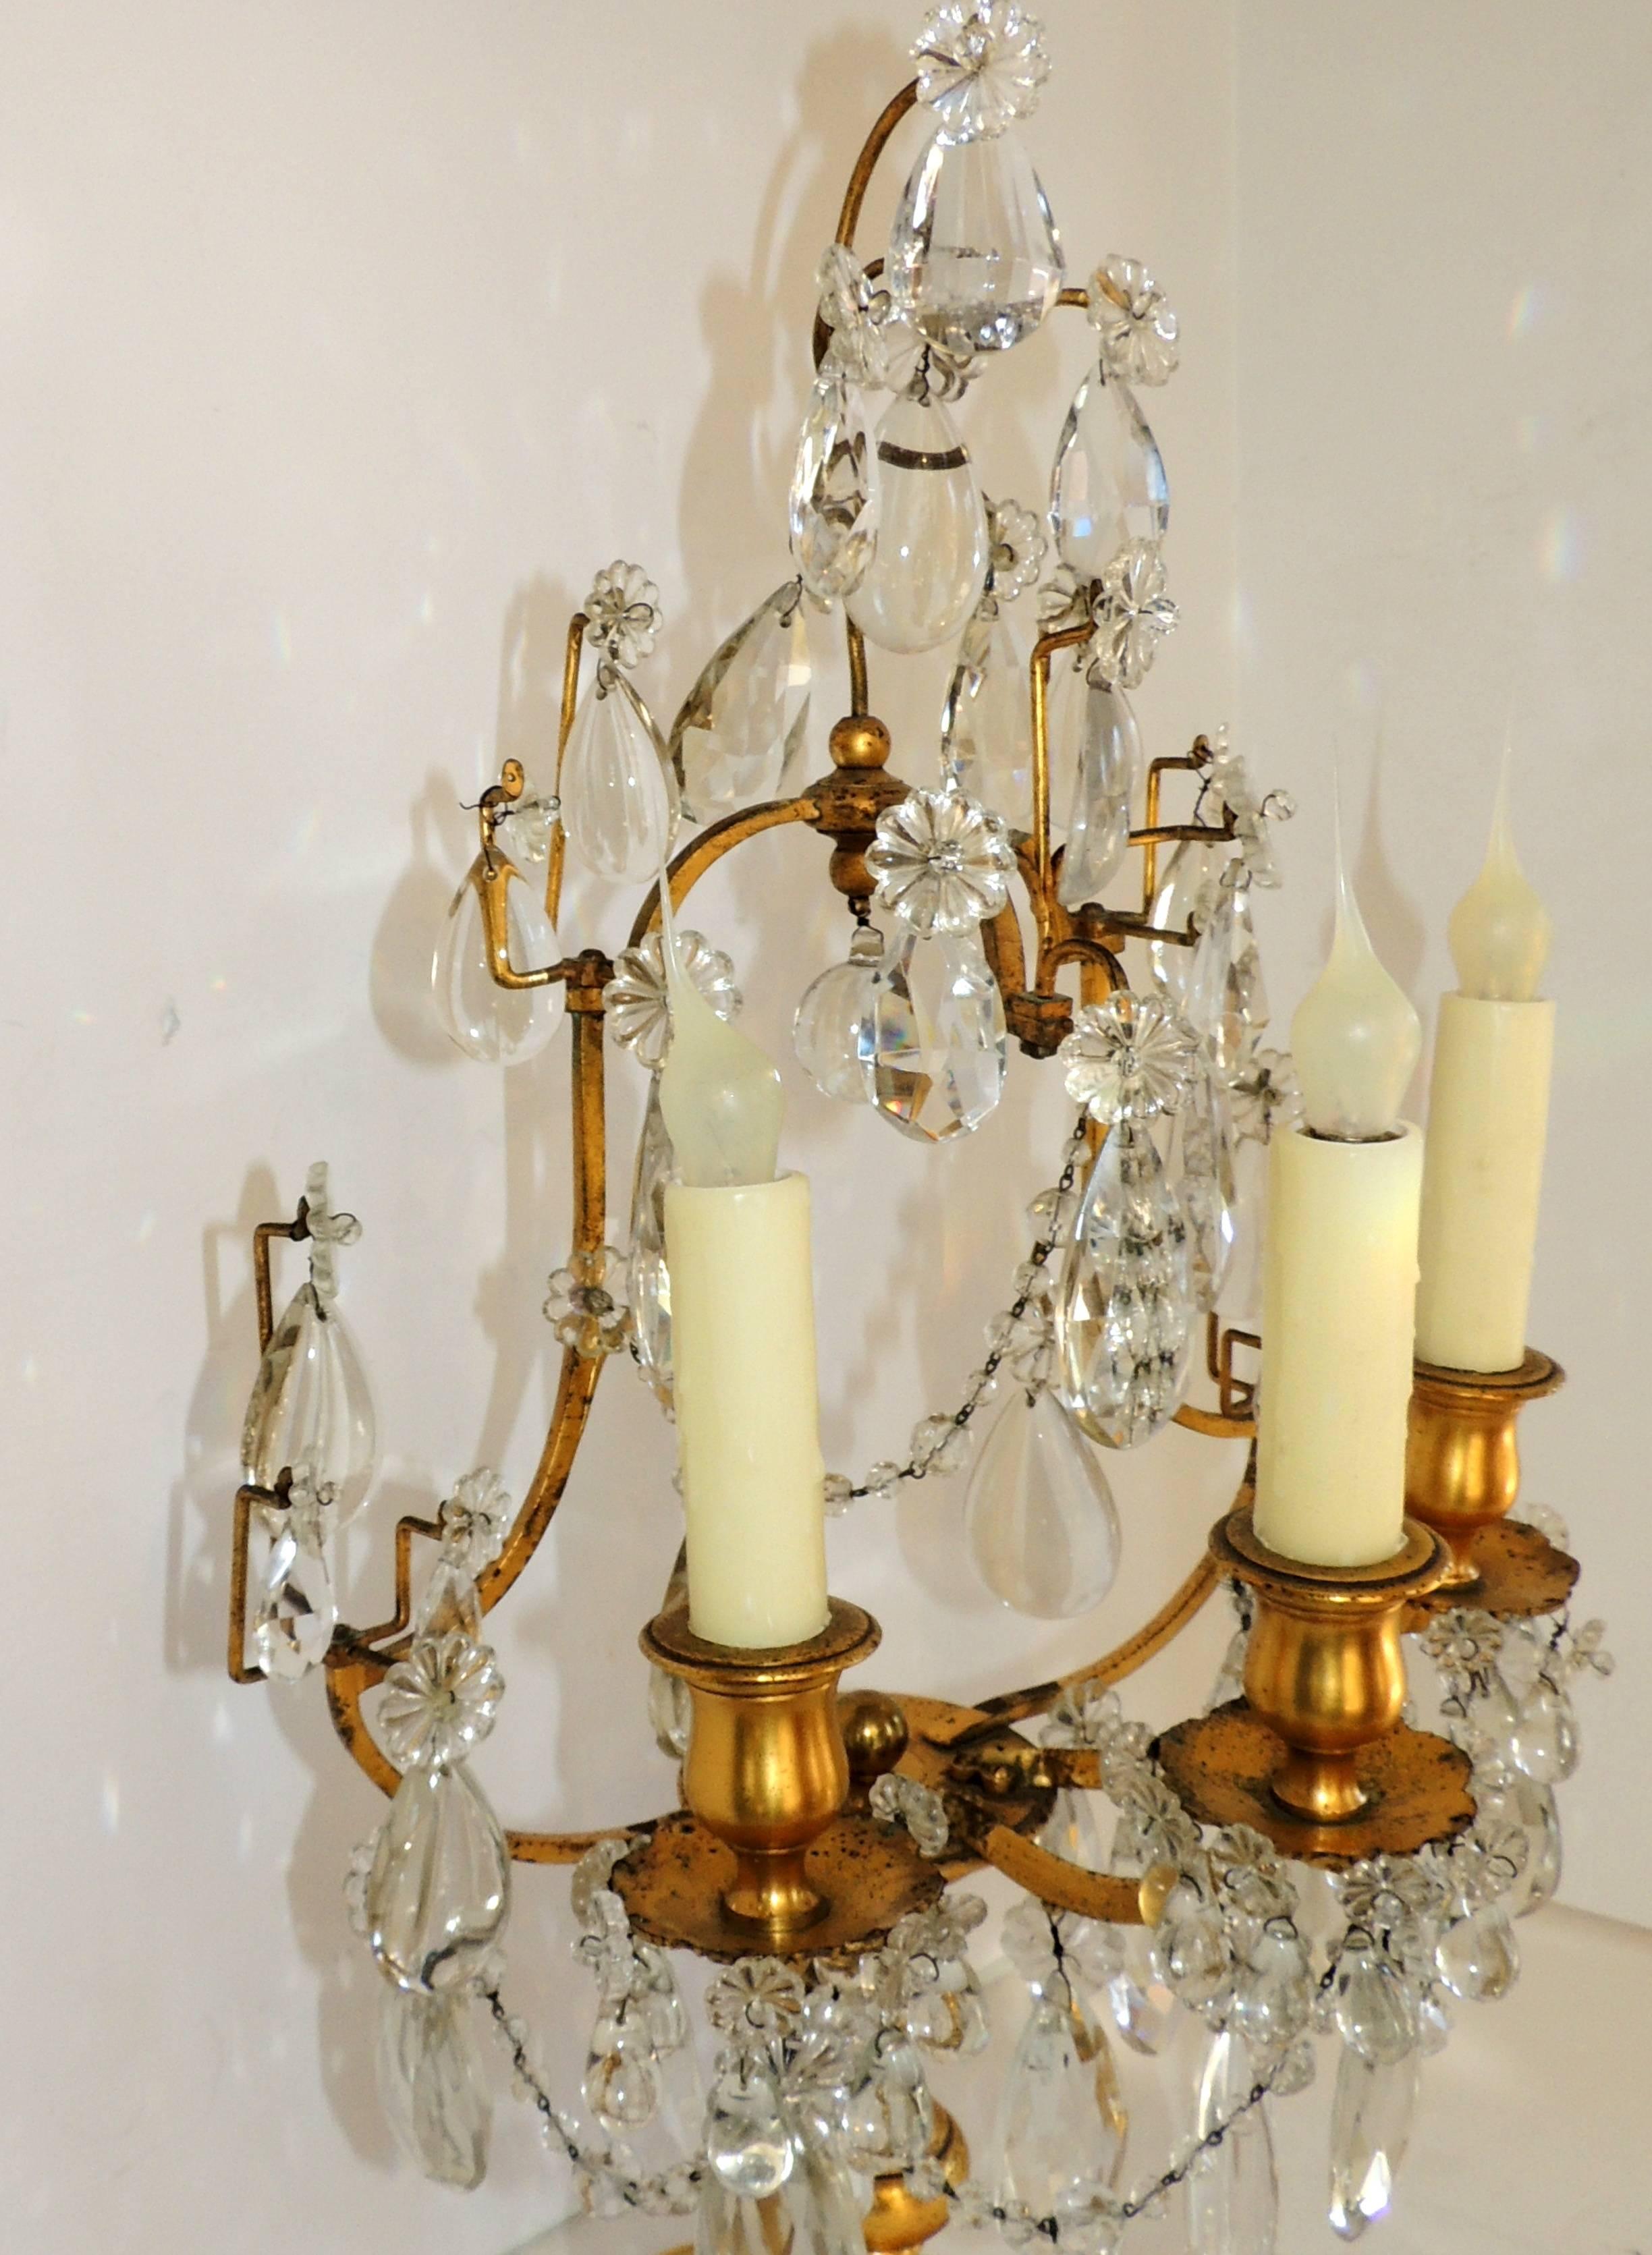 Pair of French Doré Bronze Crystal Girandoles Candelabras Three-Light Lamps For Sale 1